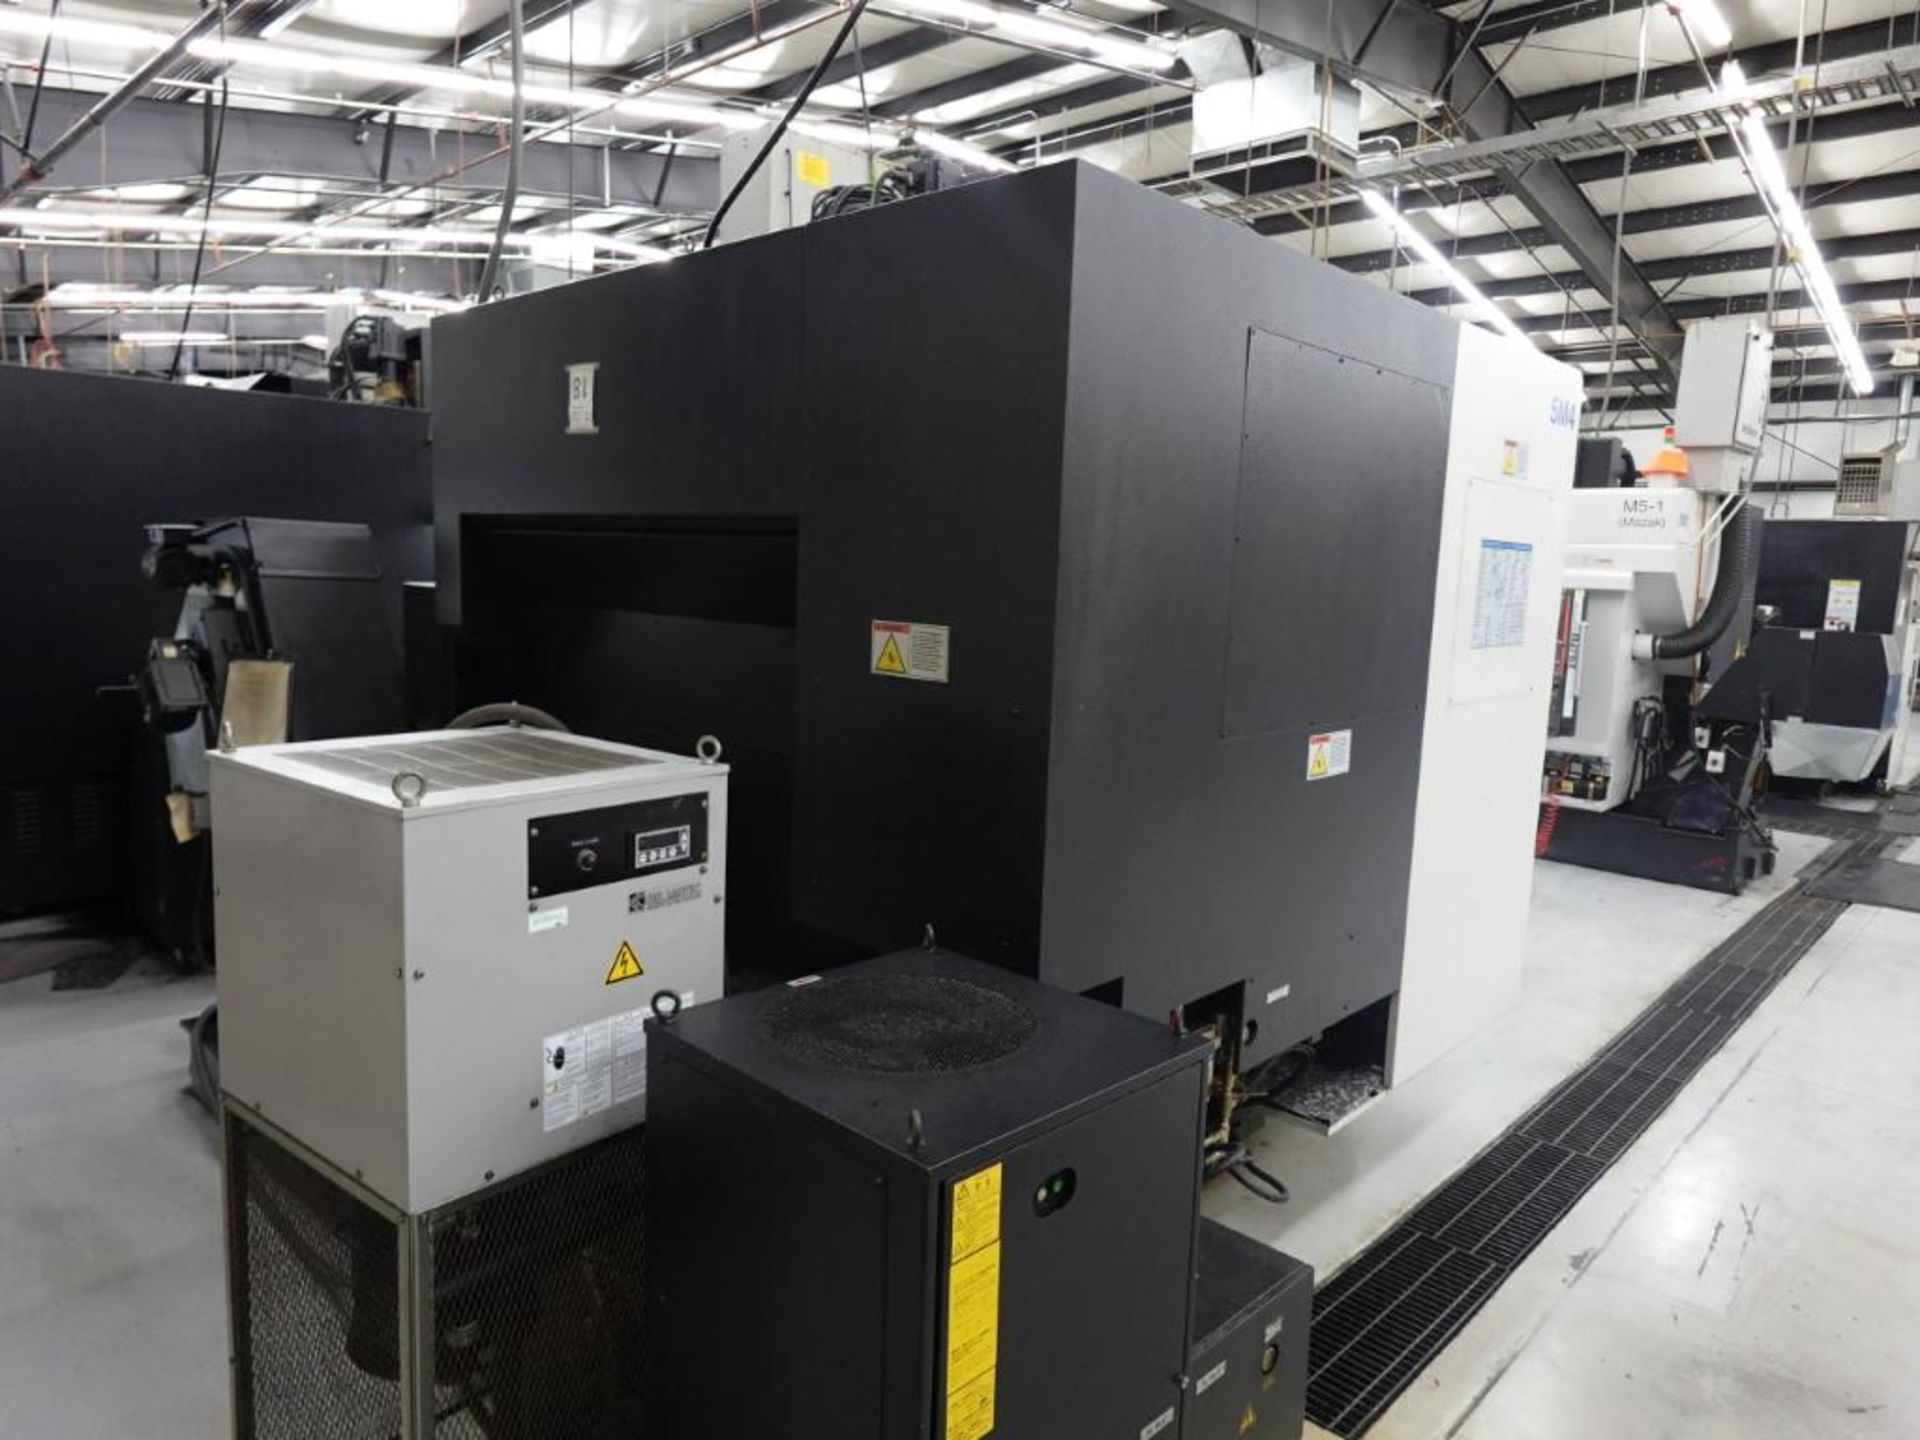 Mazak Variaxis 500-5X-II 5-Axis CNC Vertical Machining Center with Pallet Changer - Image 4 of 15